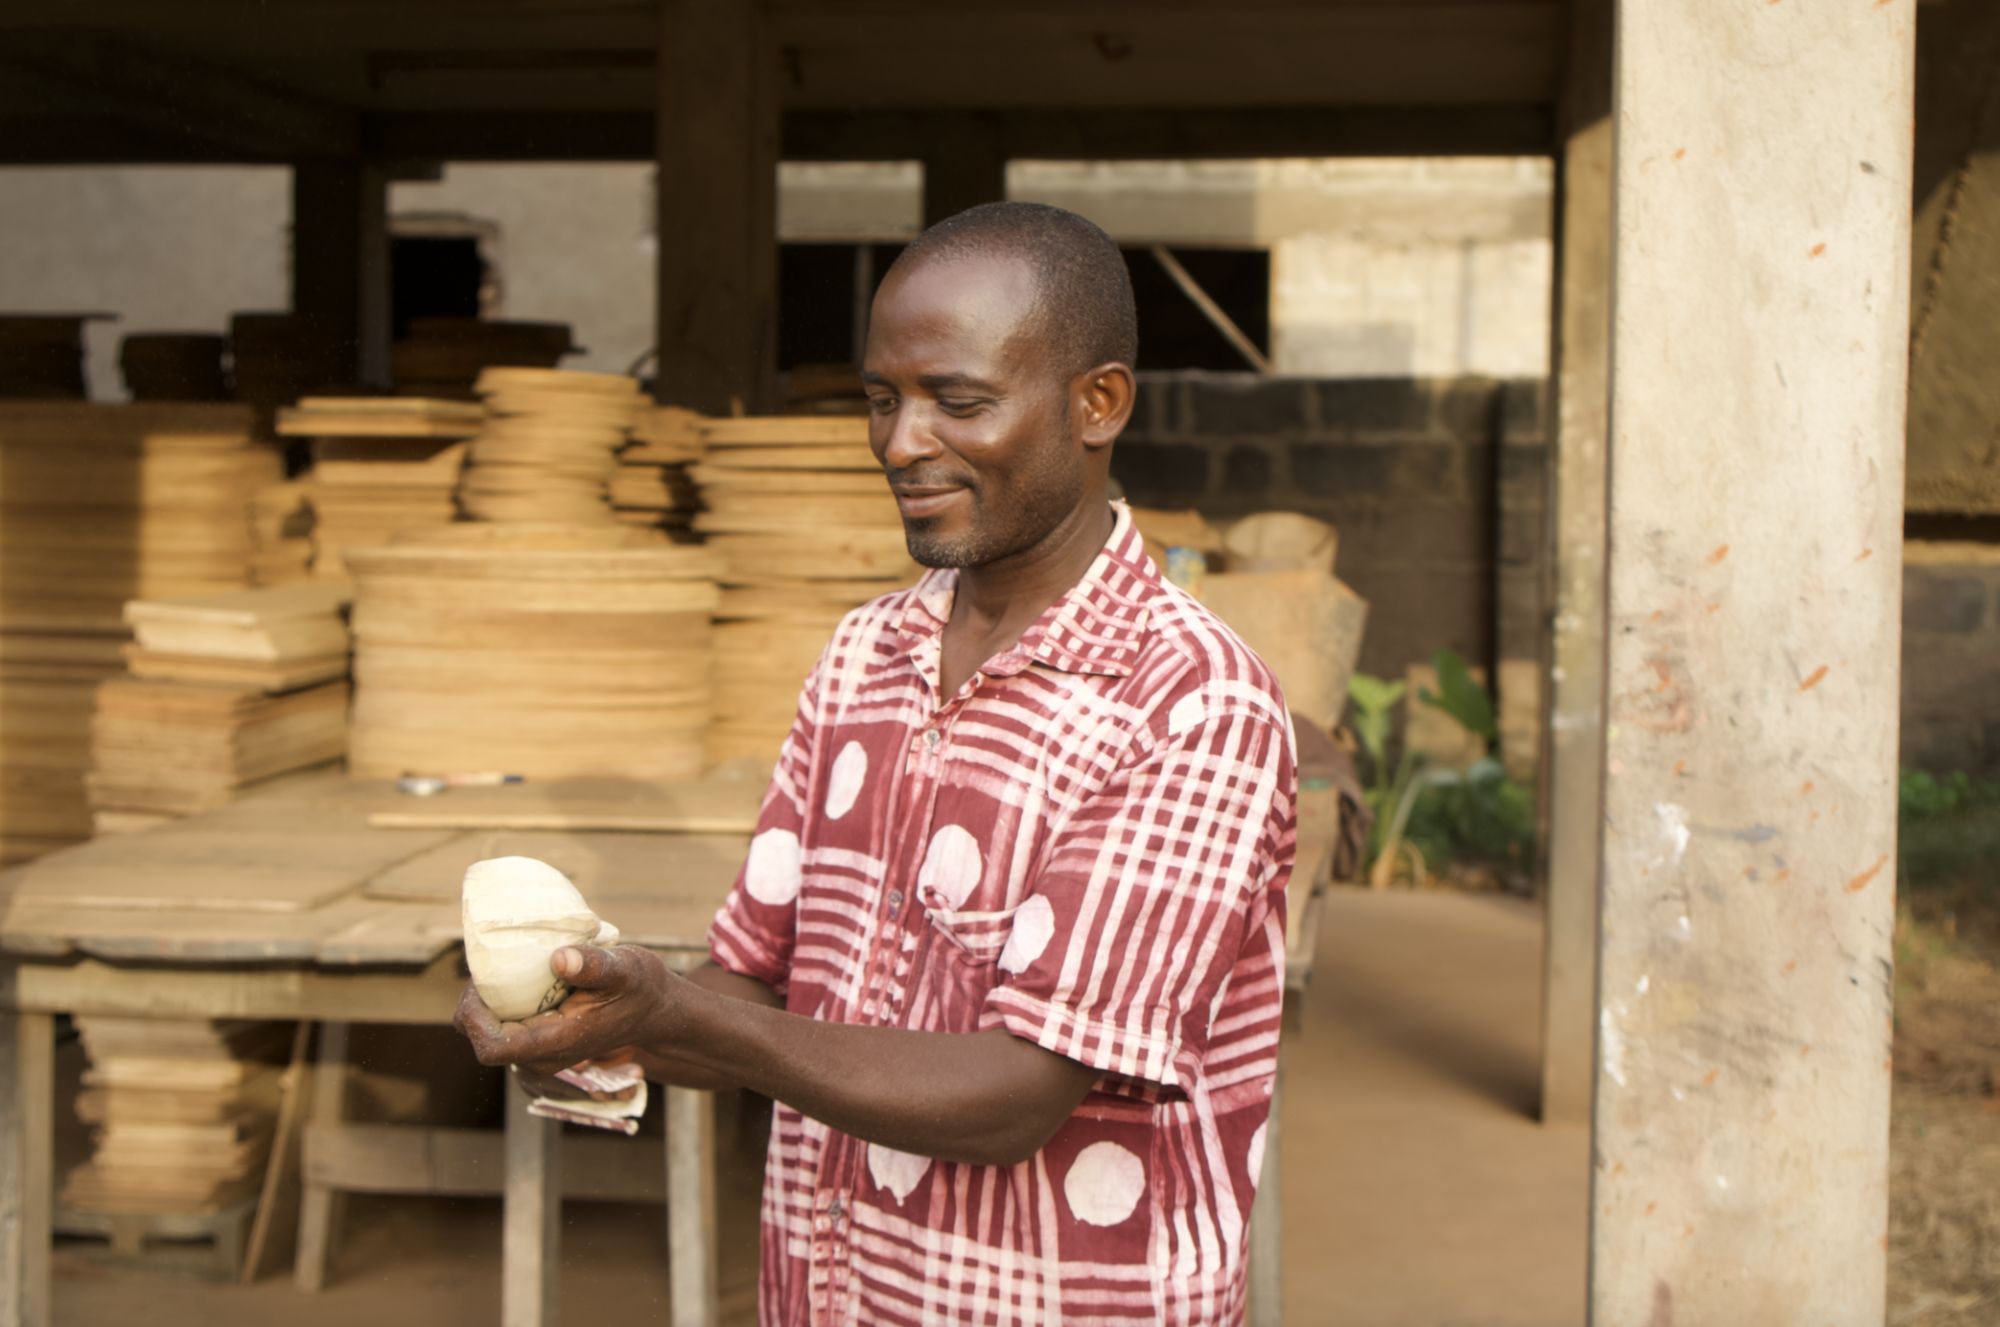 Daniel received a Kiva loan to fund his artisan business.